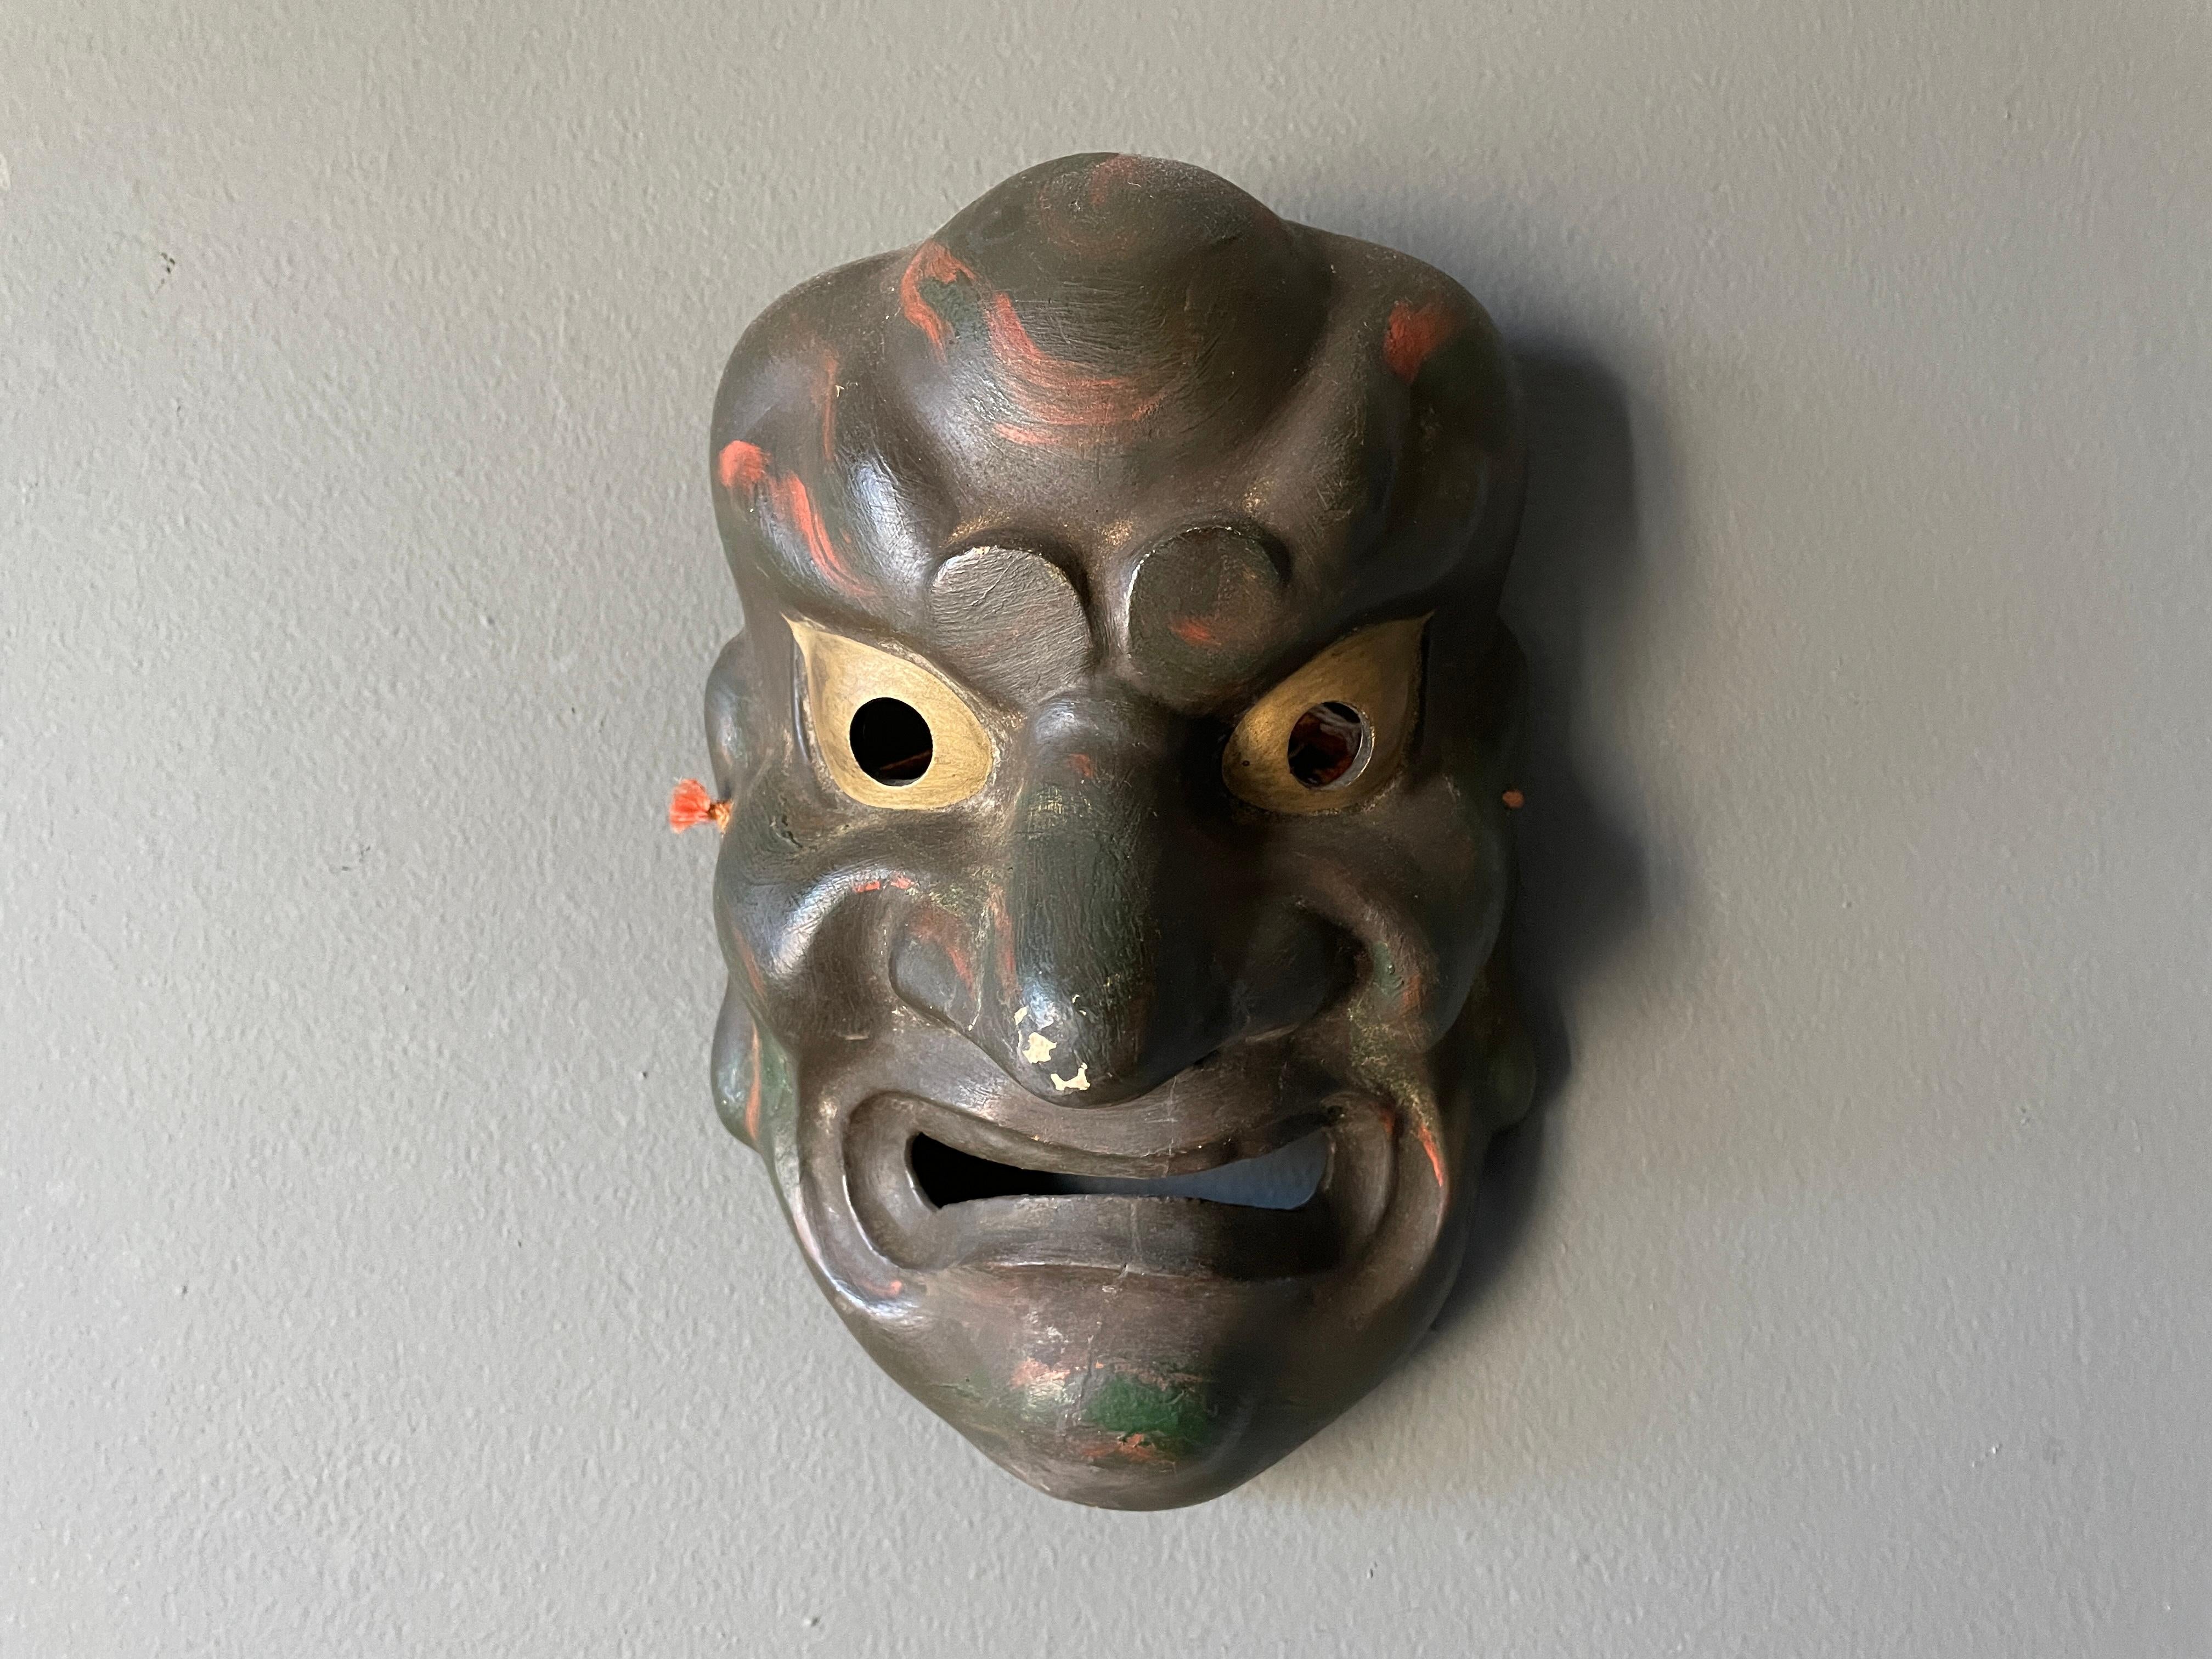 Vintage Japanese plaster Demon mask. A wonderful accent piece for any room.